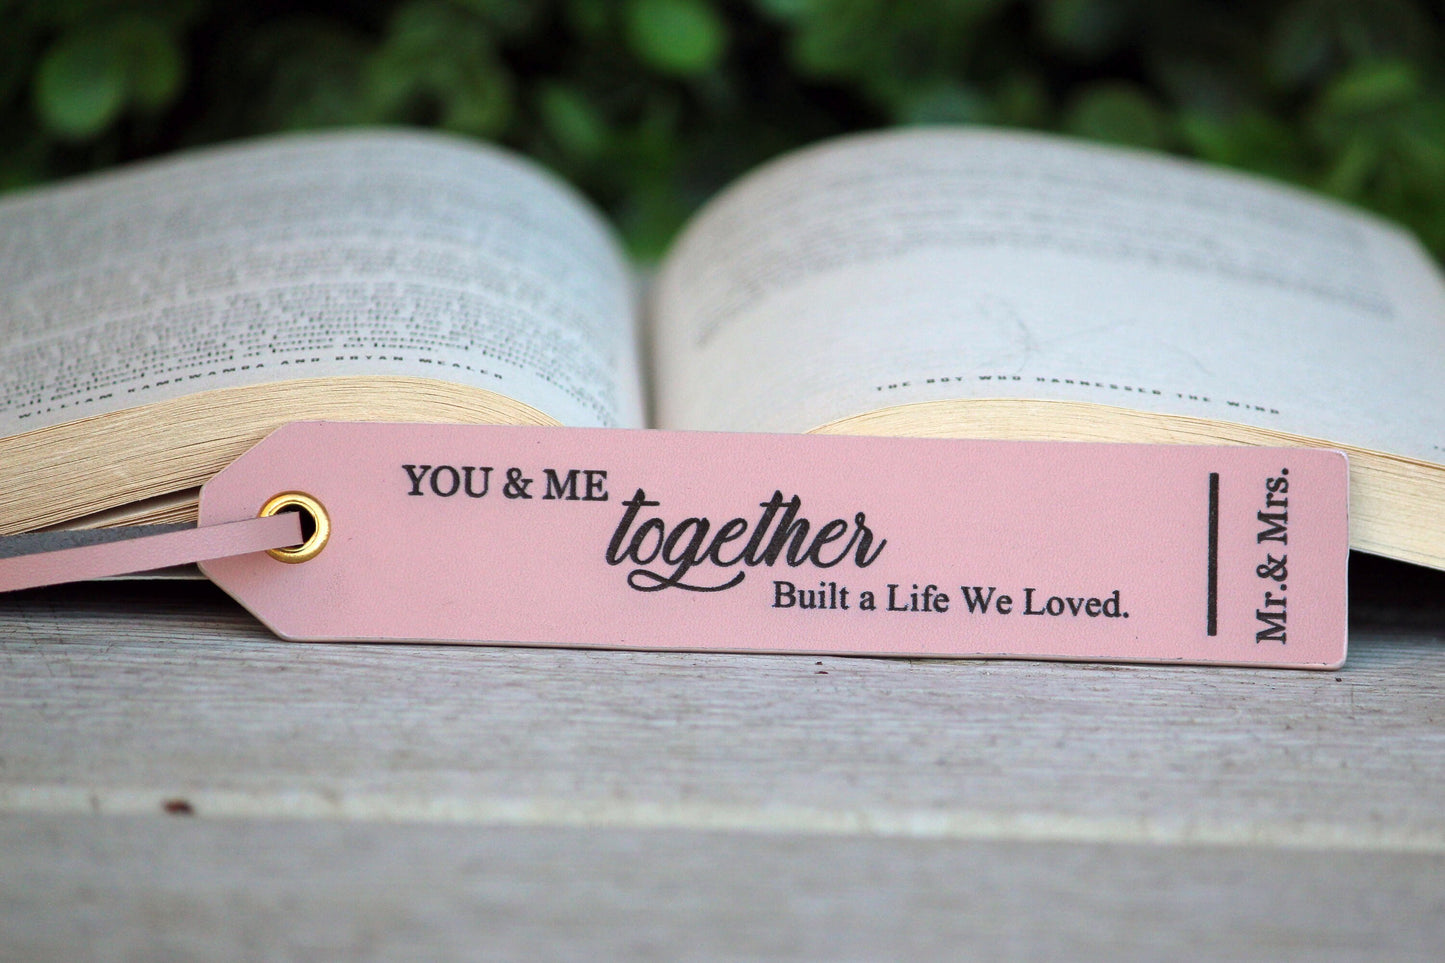 Personalized Leather Bookmark, Customized Gift, Book Lover, Gift for Readers - Birthday - Anniversary - Wedding - Groomsmen, Fathers Day